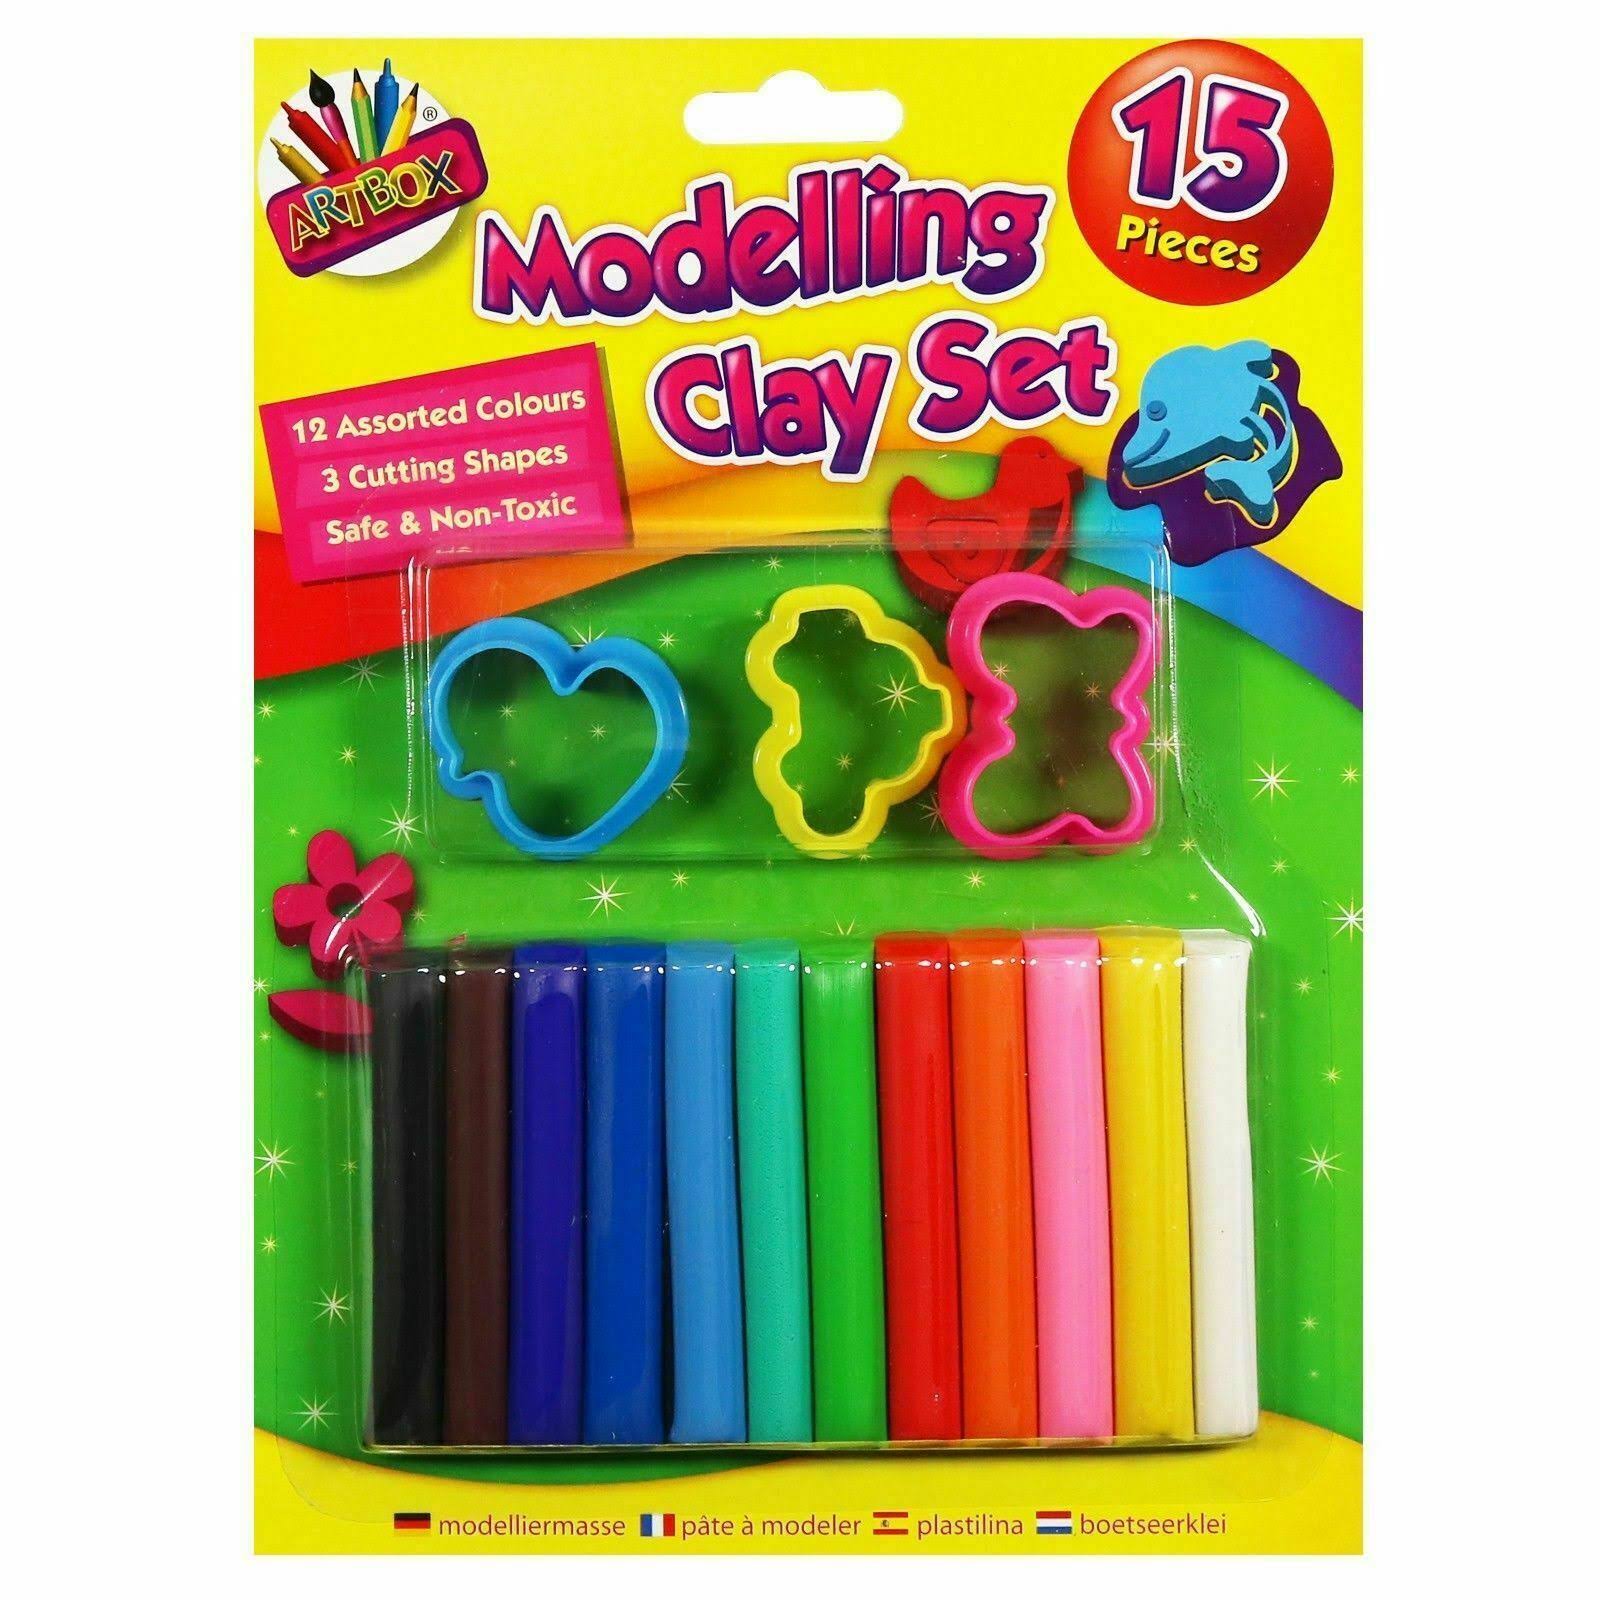 Artbox Childrens Modelling Clay Kit - 12 Colours, 3 Moulds